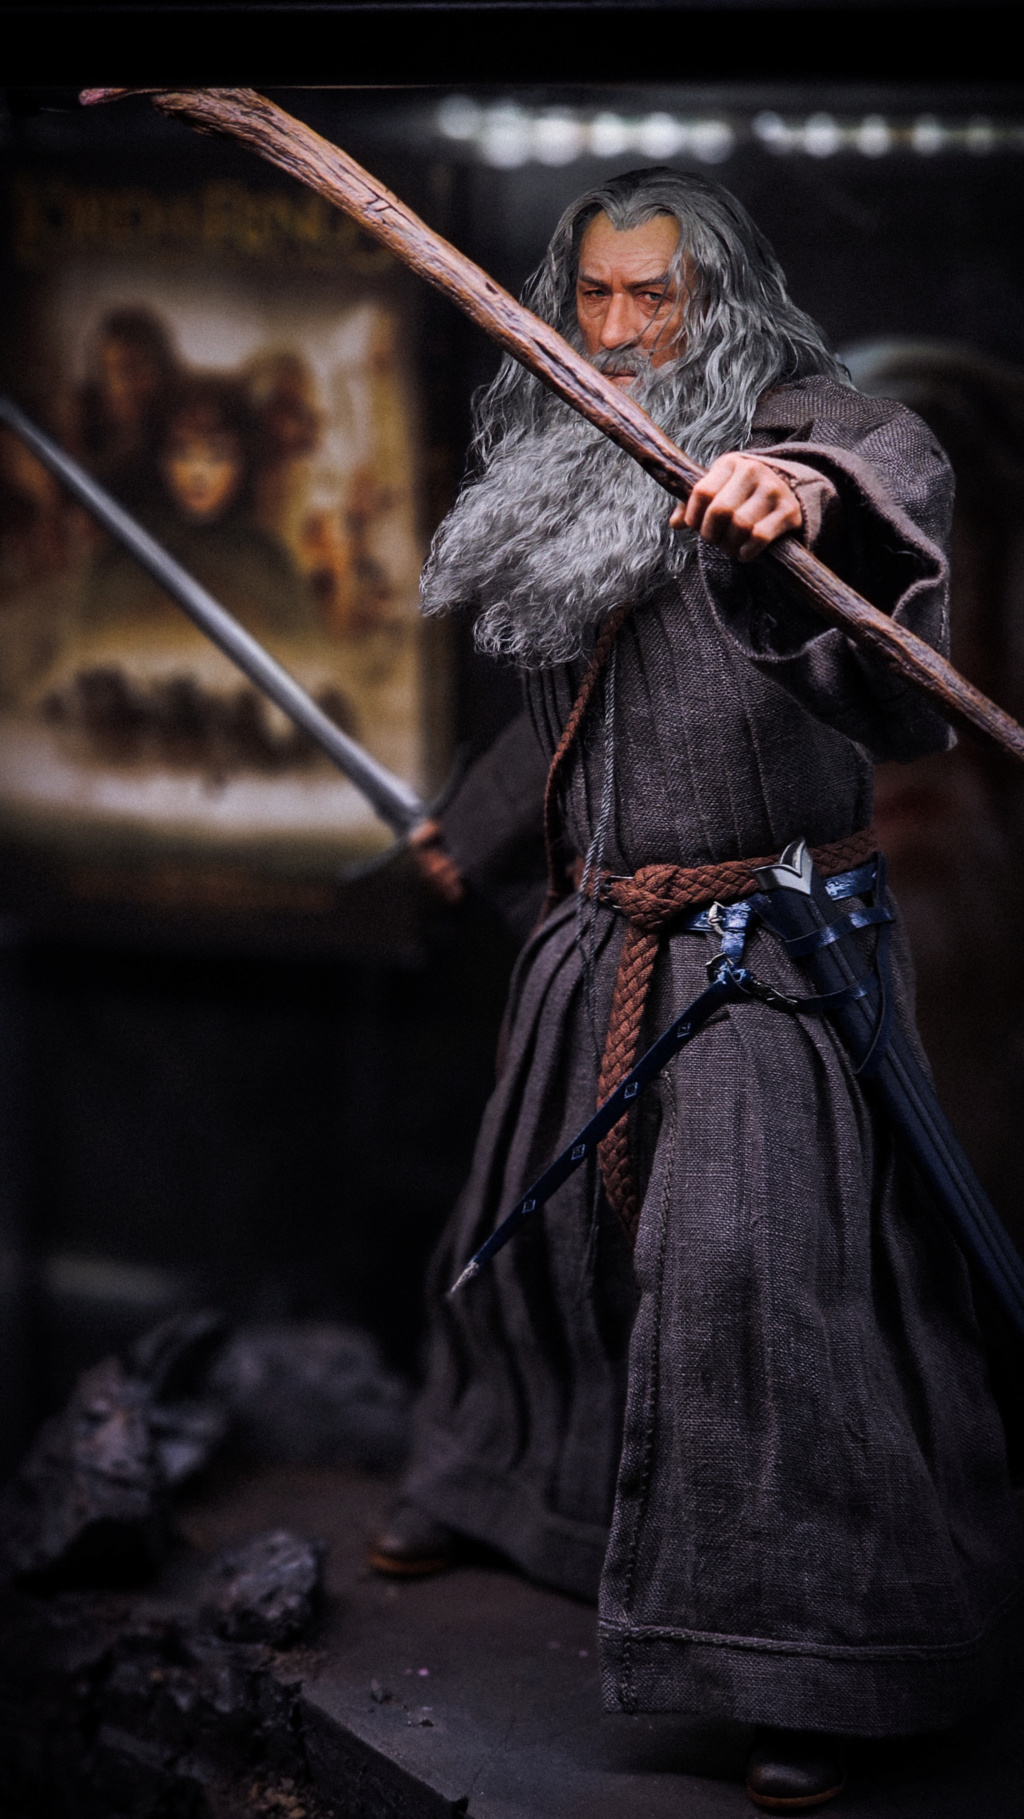 InArt - NEW PRODUCT: Queen Studios & INART: 1/6 The Lord of the Rings Gandalf (Grey Robe) Action Figure - Page 4 47760310